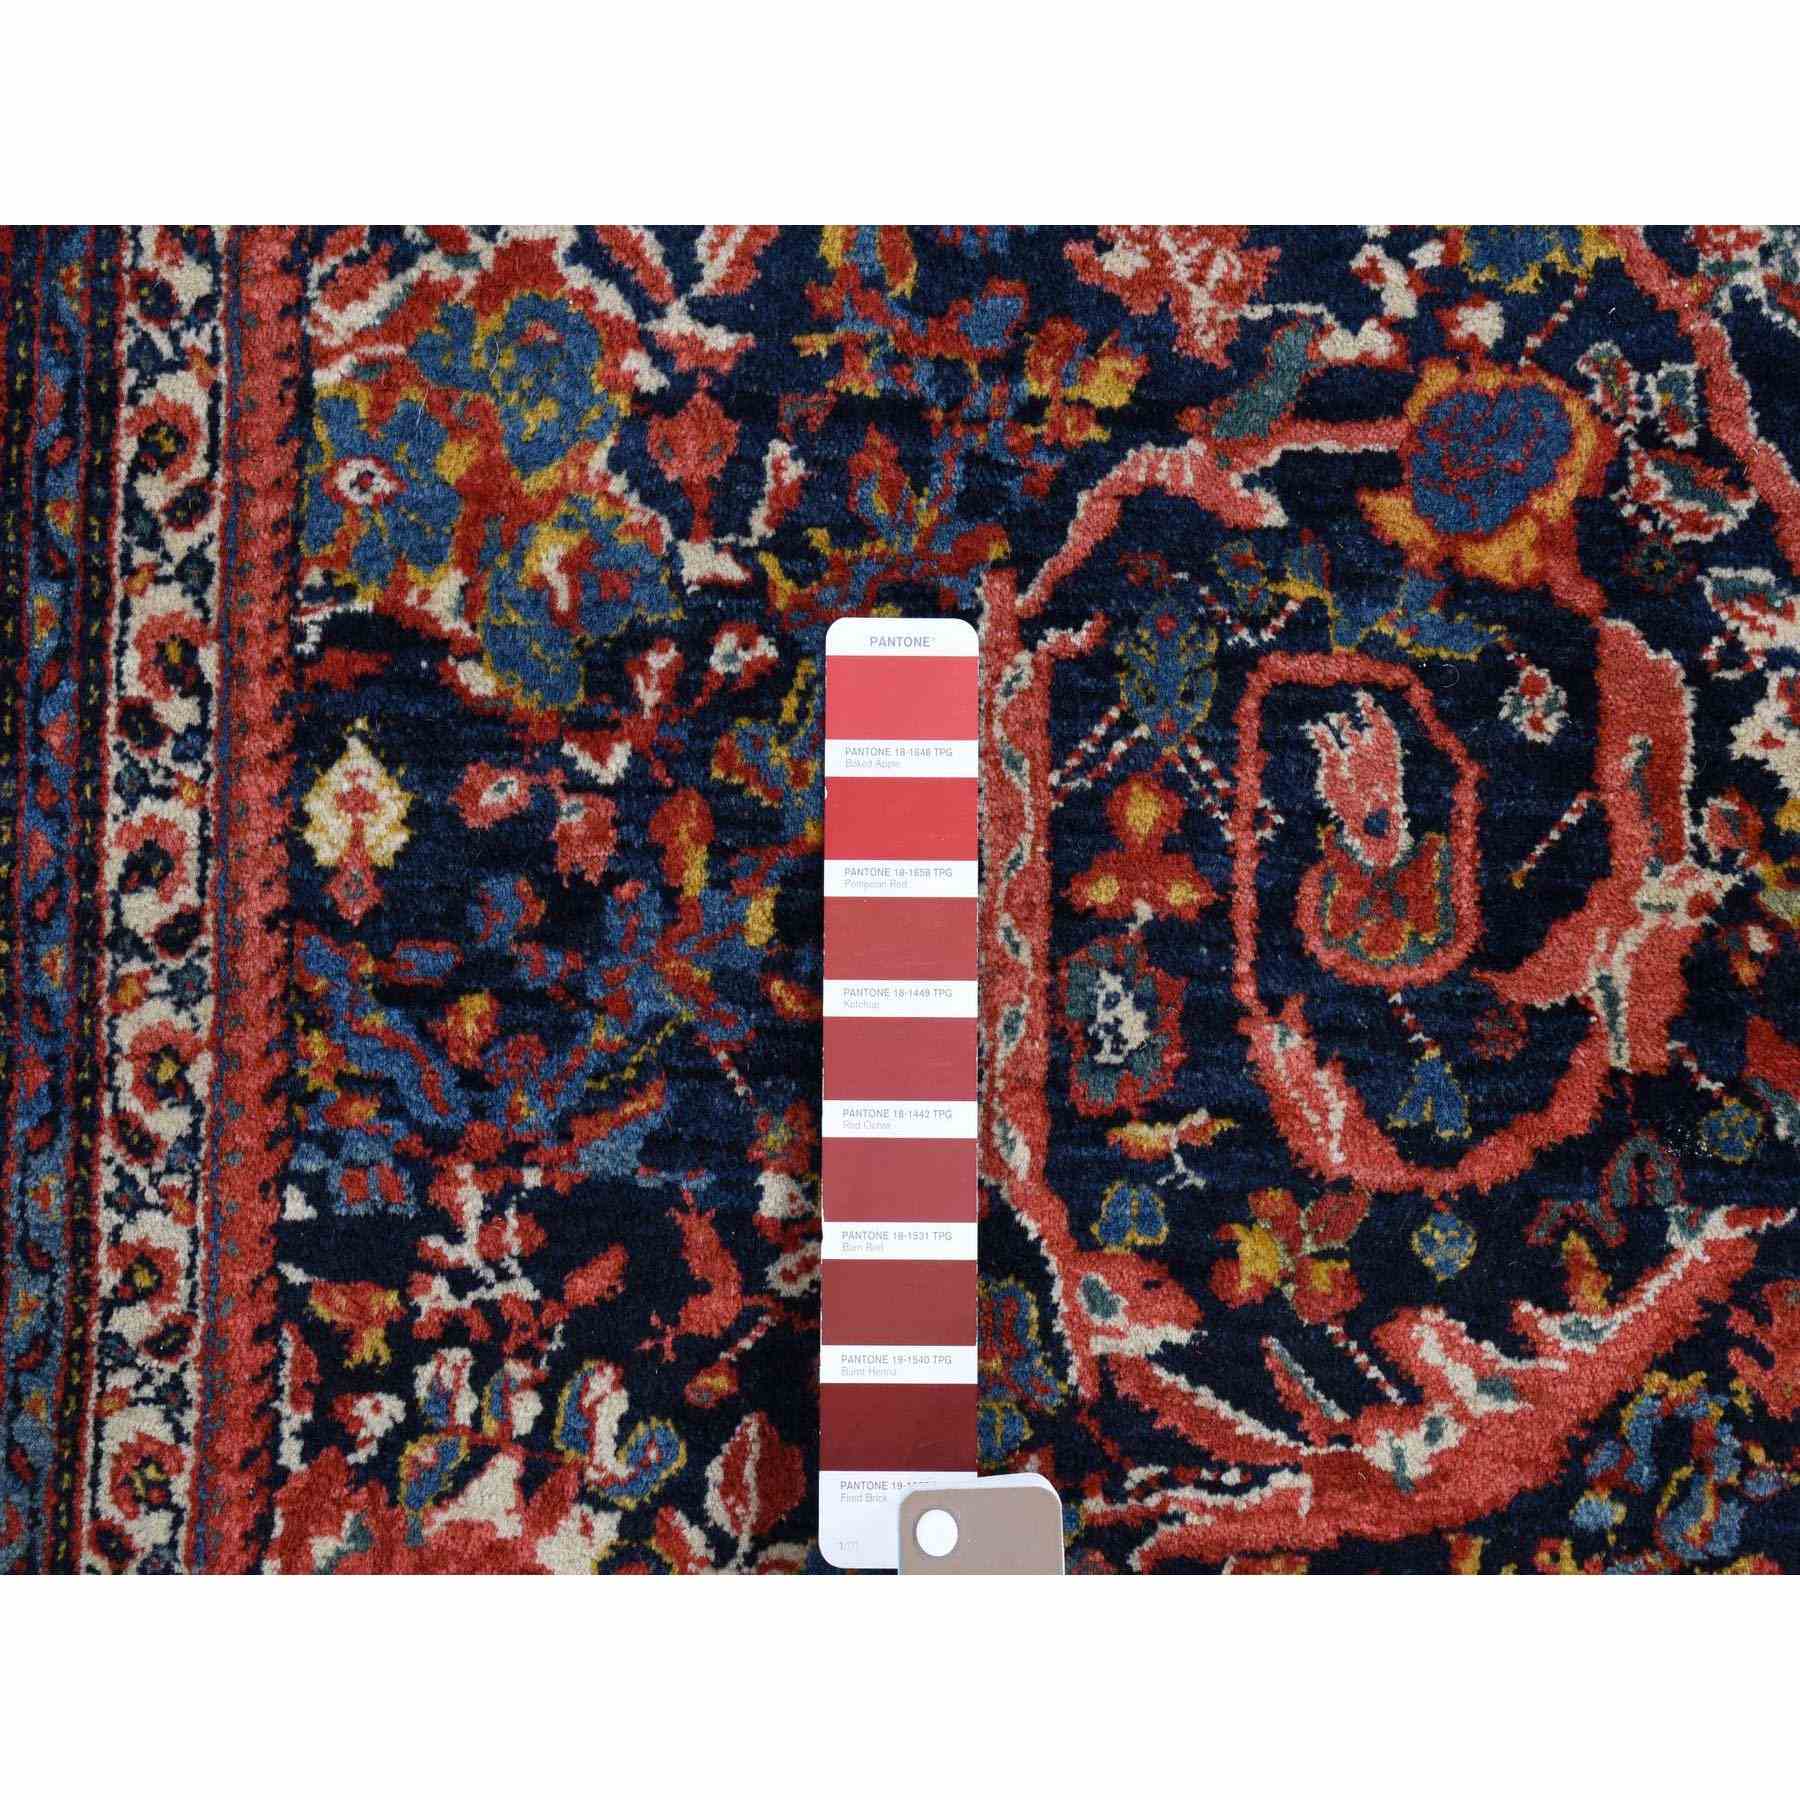 Antique-Hand-Knotted-Rug-402525